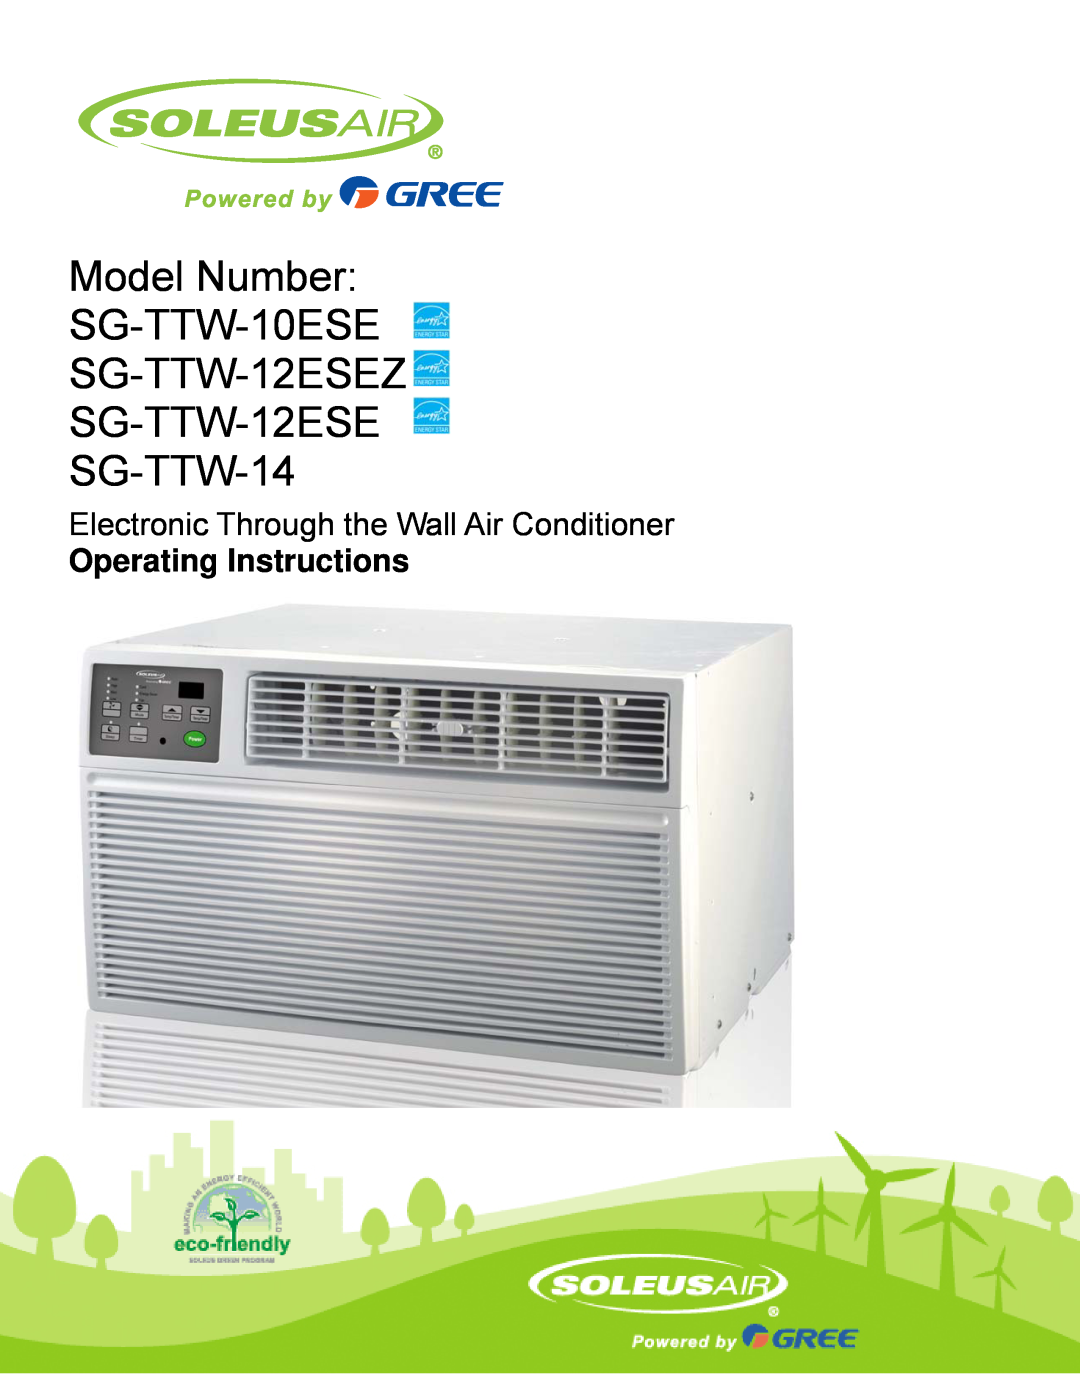 Soleus Air manual Model Number SG-TTW-10ESE, Electronic Through the Wall Air Conditioner, Operating Instructions 